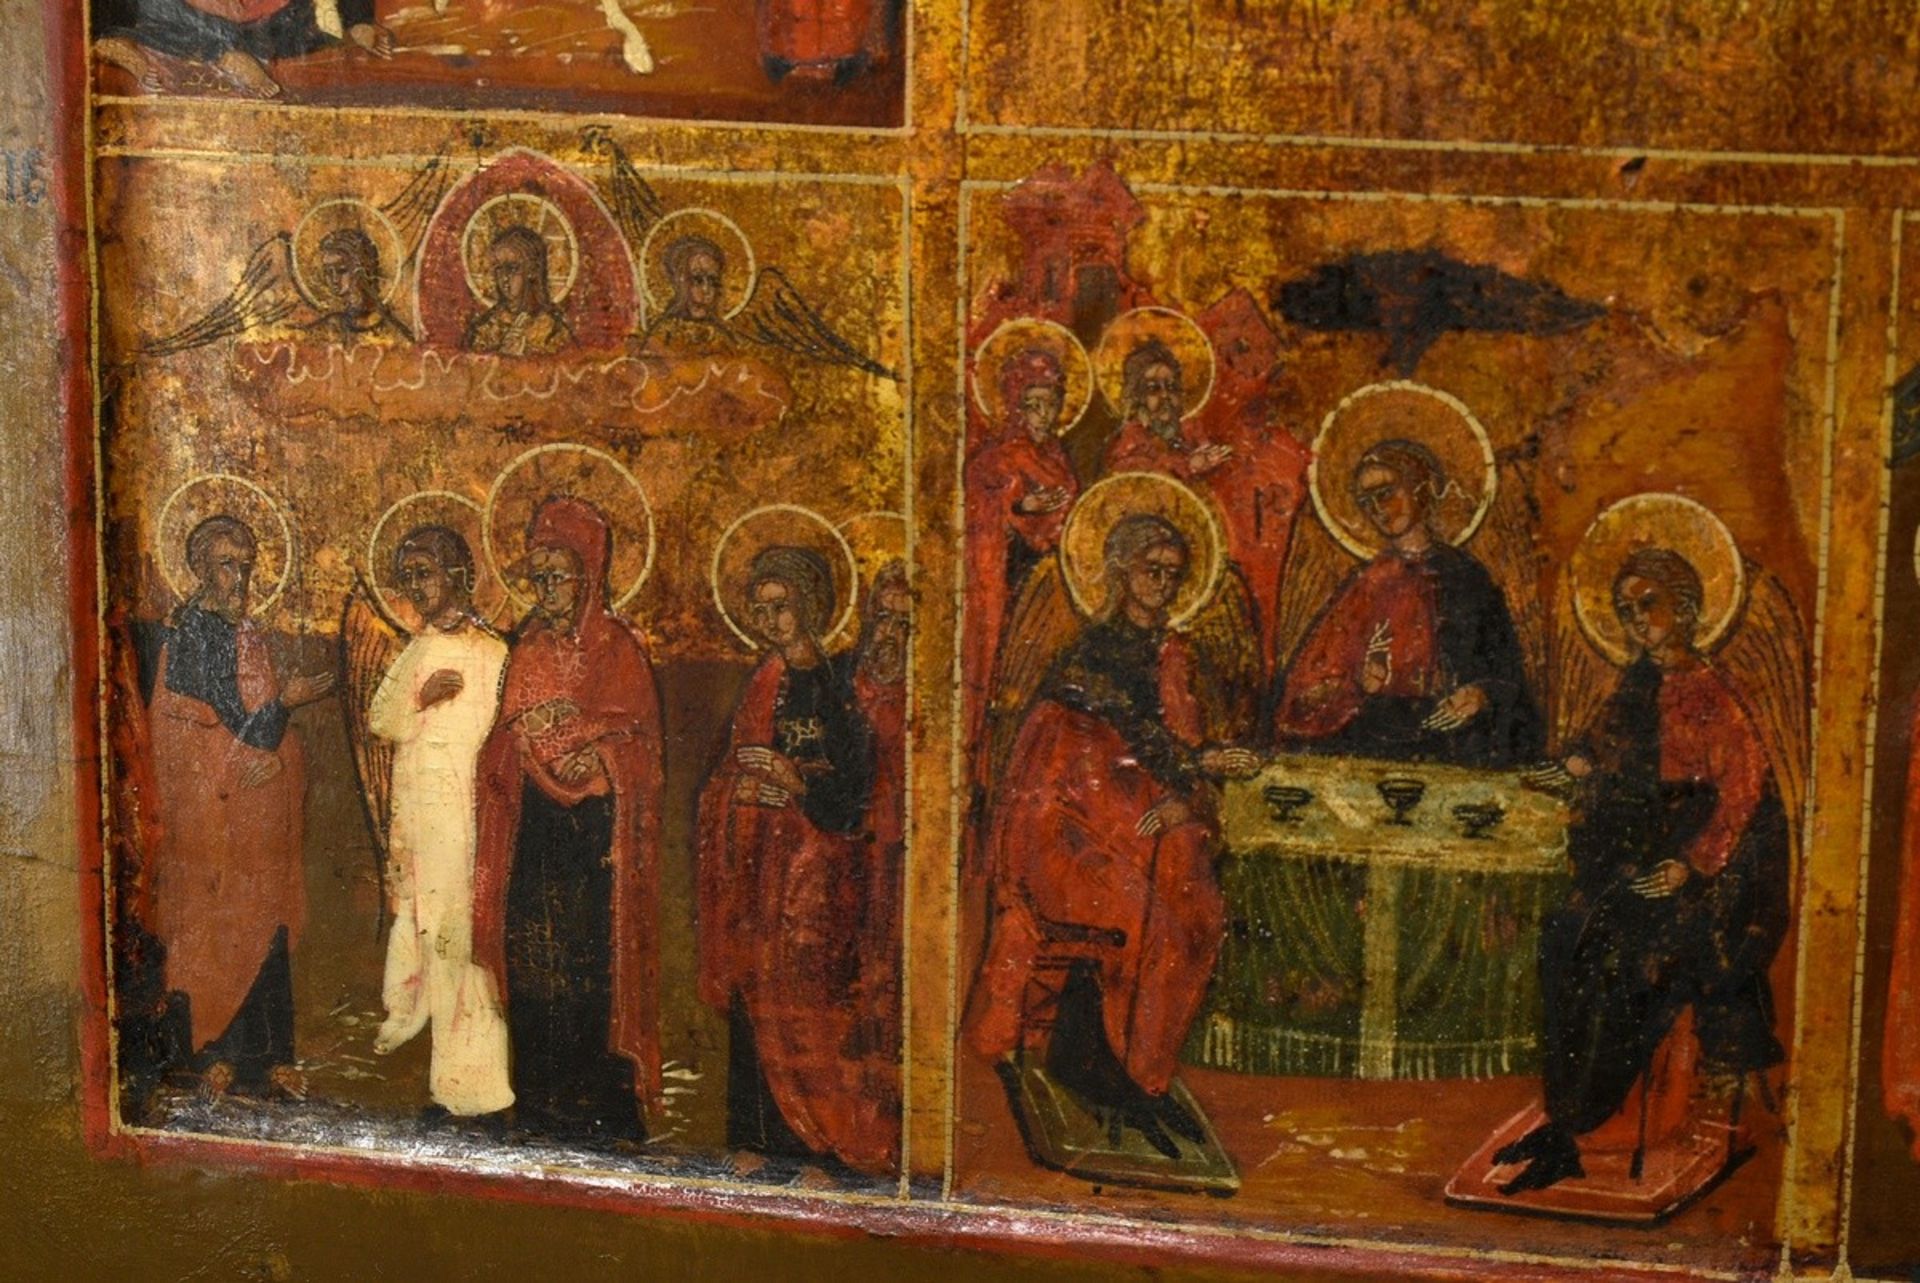 Central Russian feast day icon "Easter events, Ascension and Resurrection of Christ" in the central - Image 7 of 8